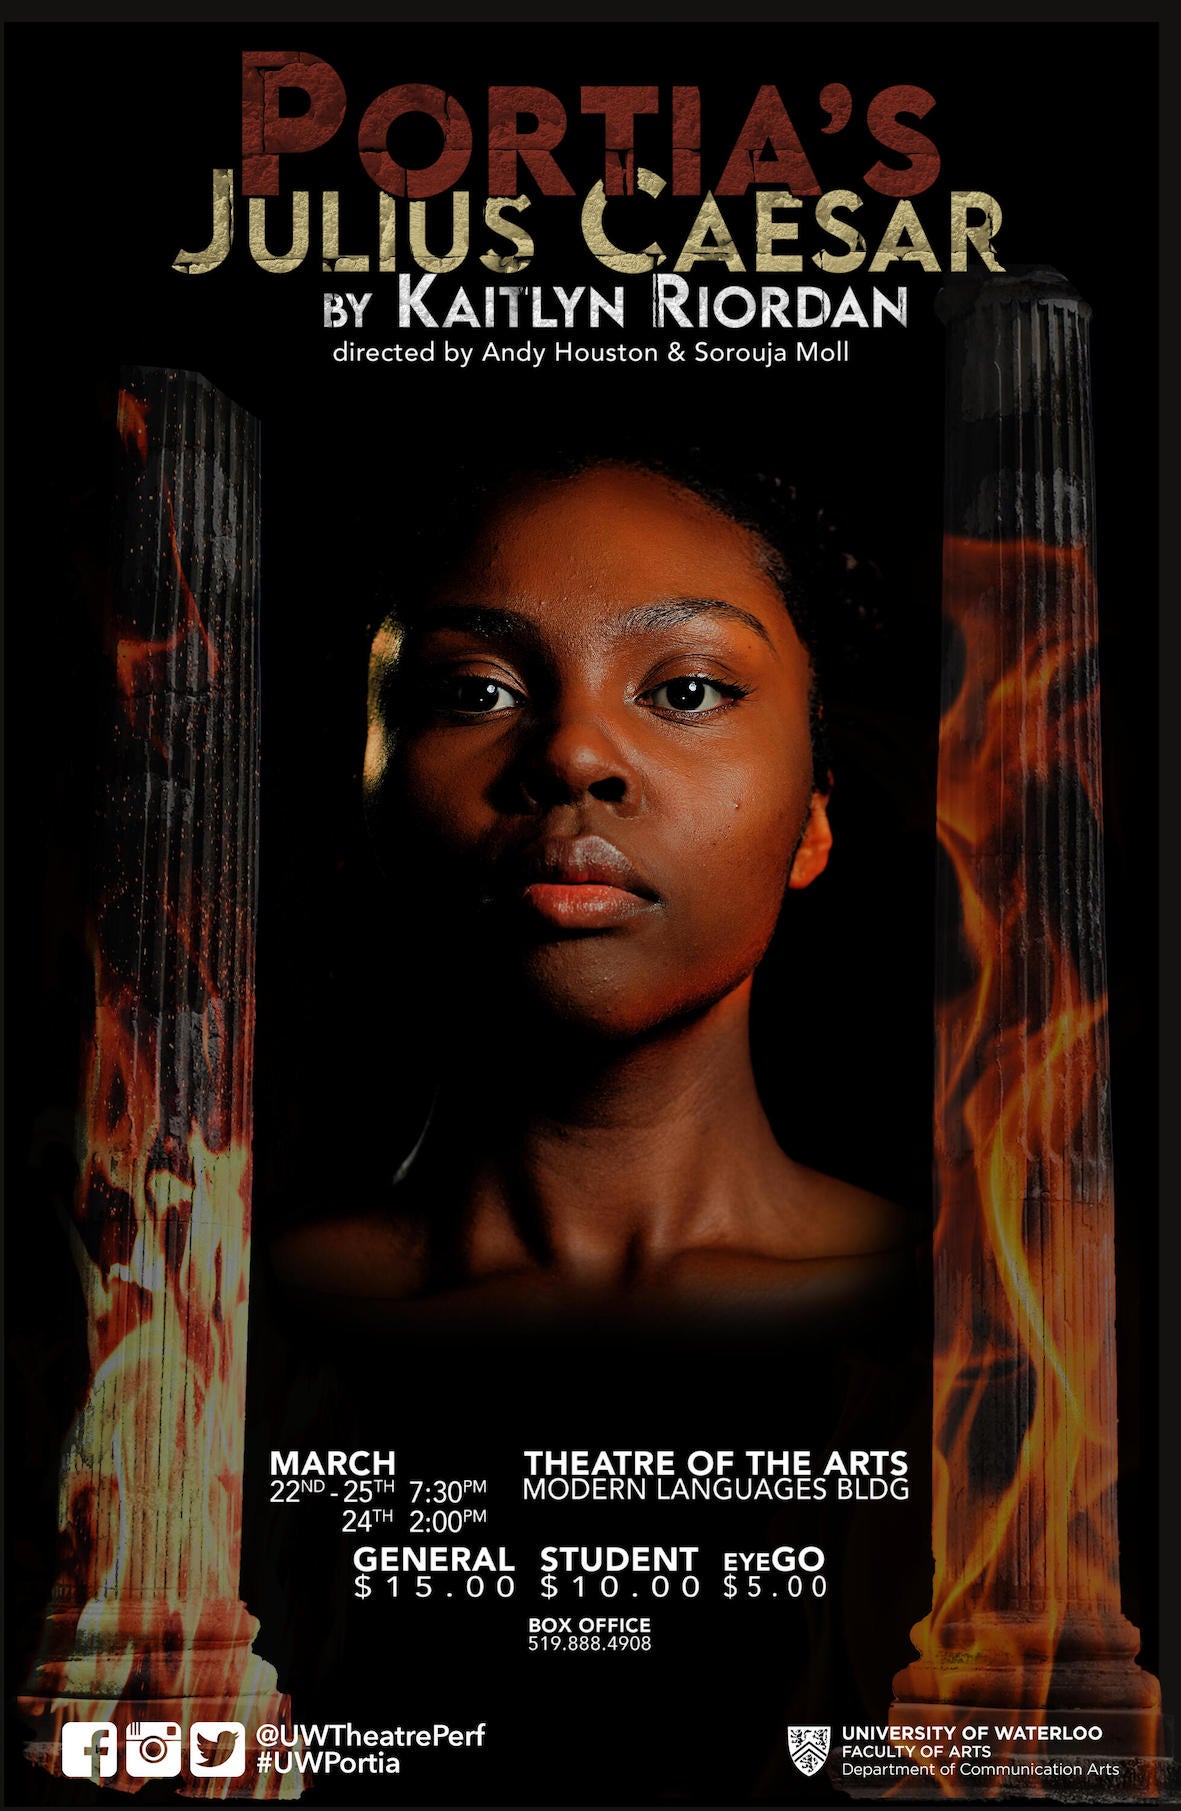 Poster for production, a Black woman with hair up, looks out from centre of poster